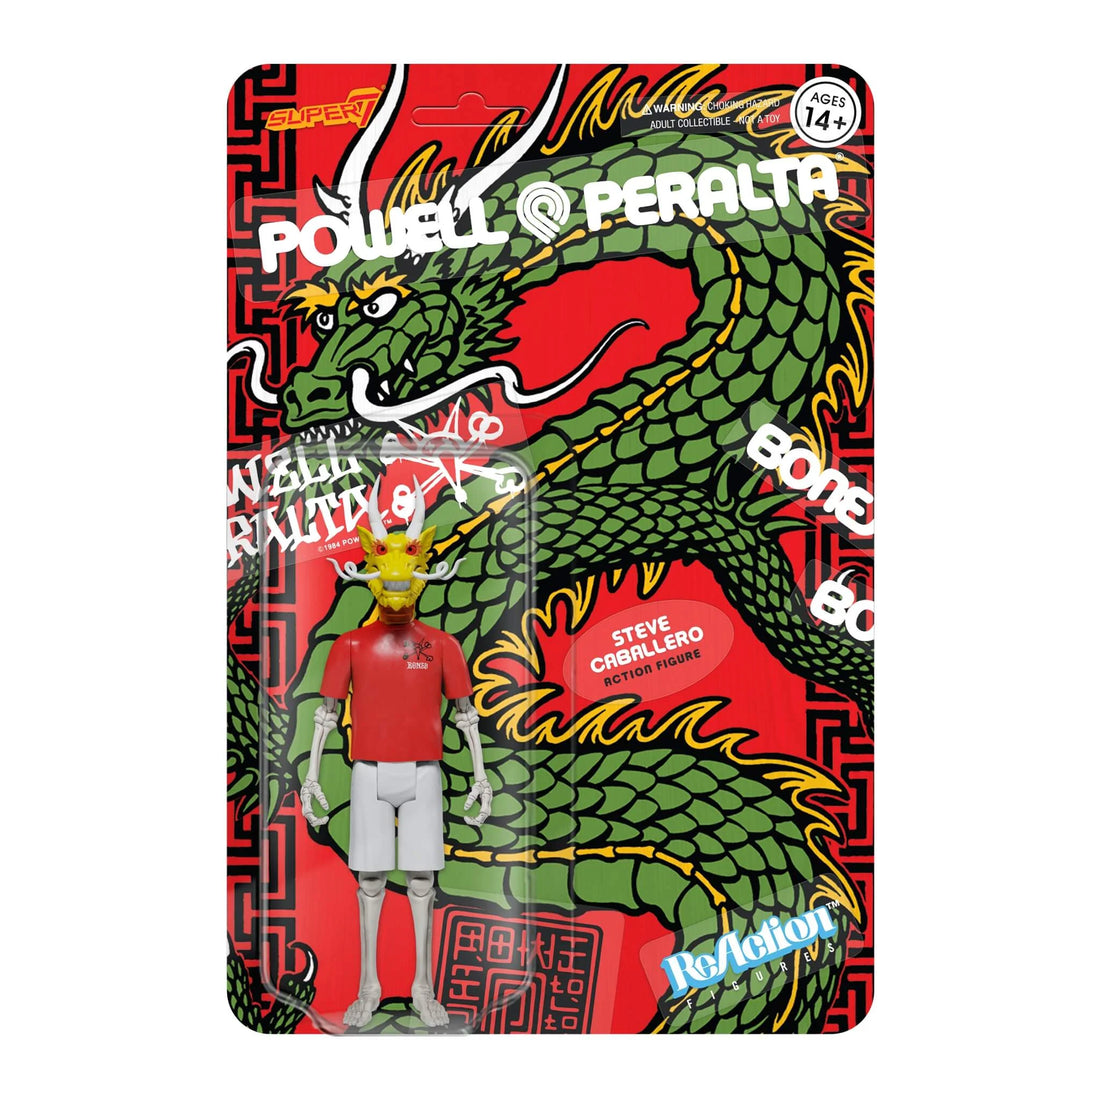 Powell-Peralta ReAction Figures Wave 1 Steve Caballero - Chinese Dragon -Package Blems-